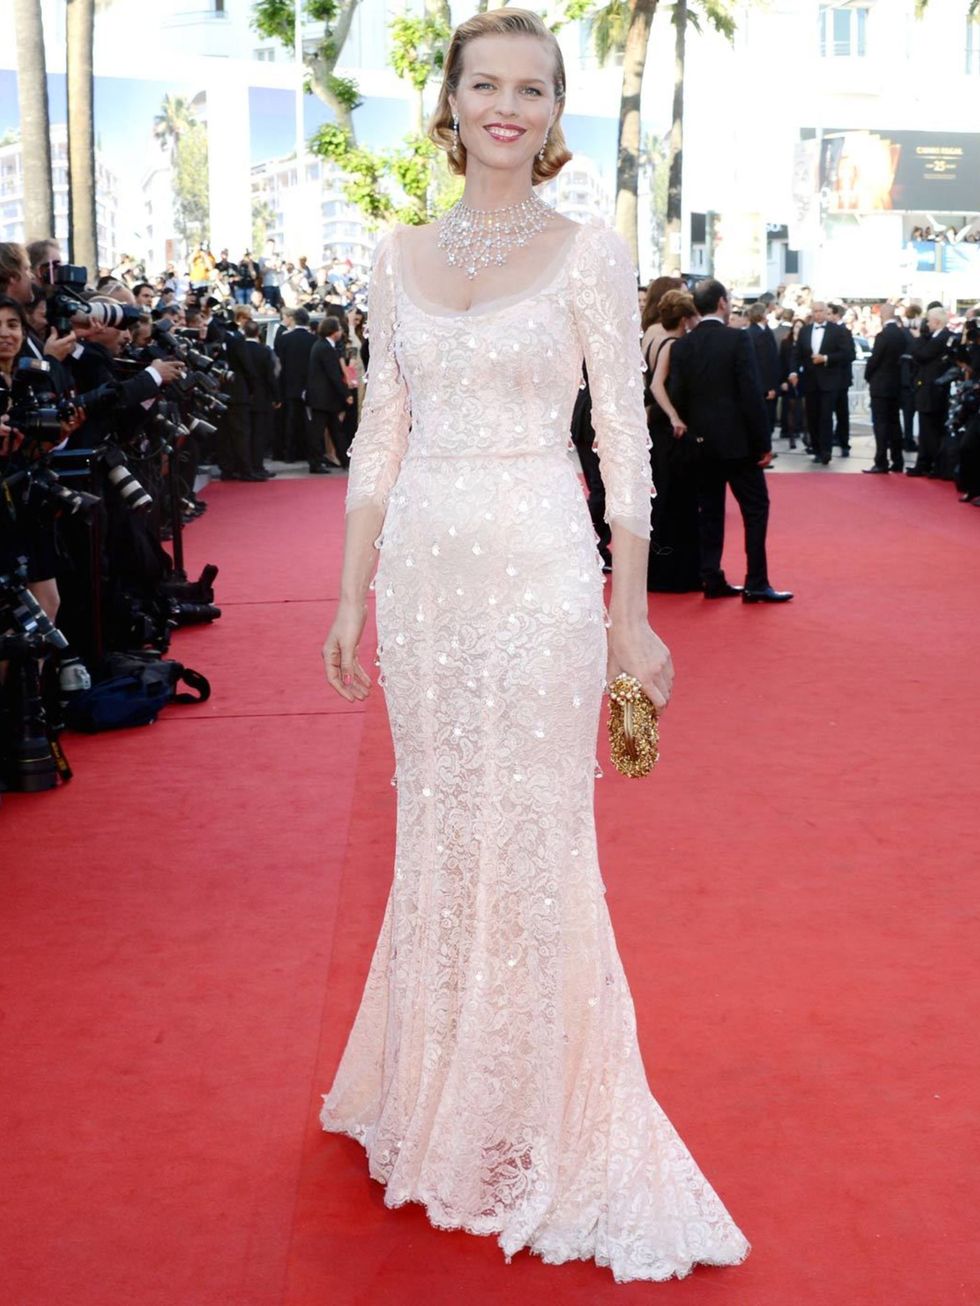 <p><a href="http://www.elleuk.com/content/search?SearchText=Eva+Herzigova&amp;SearchButto">Eva Herzigova</a> wearing an embellished white gown on the red carpet during <a href="http://www.elleuk.com/star-style/red-carpet/cannes-film-festival-2012">Cannes 